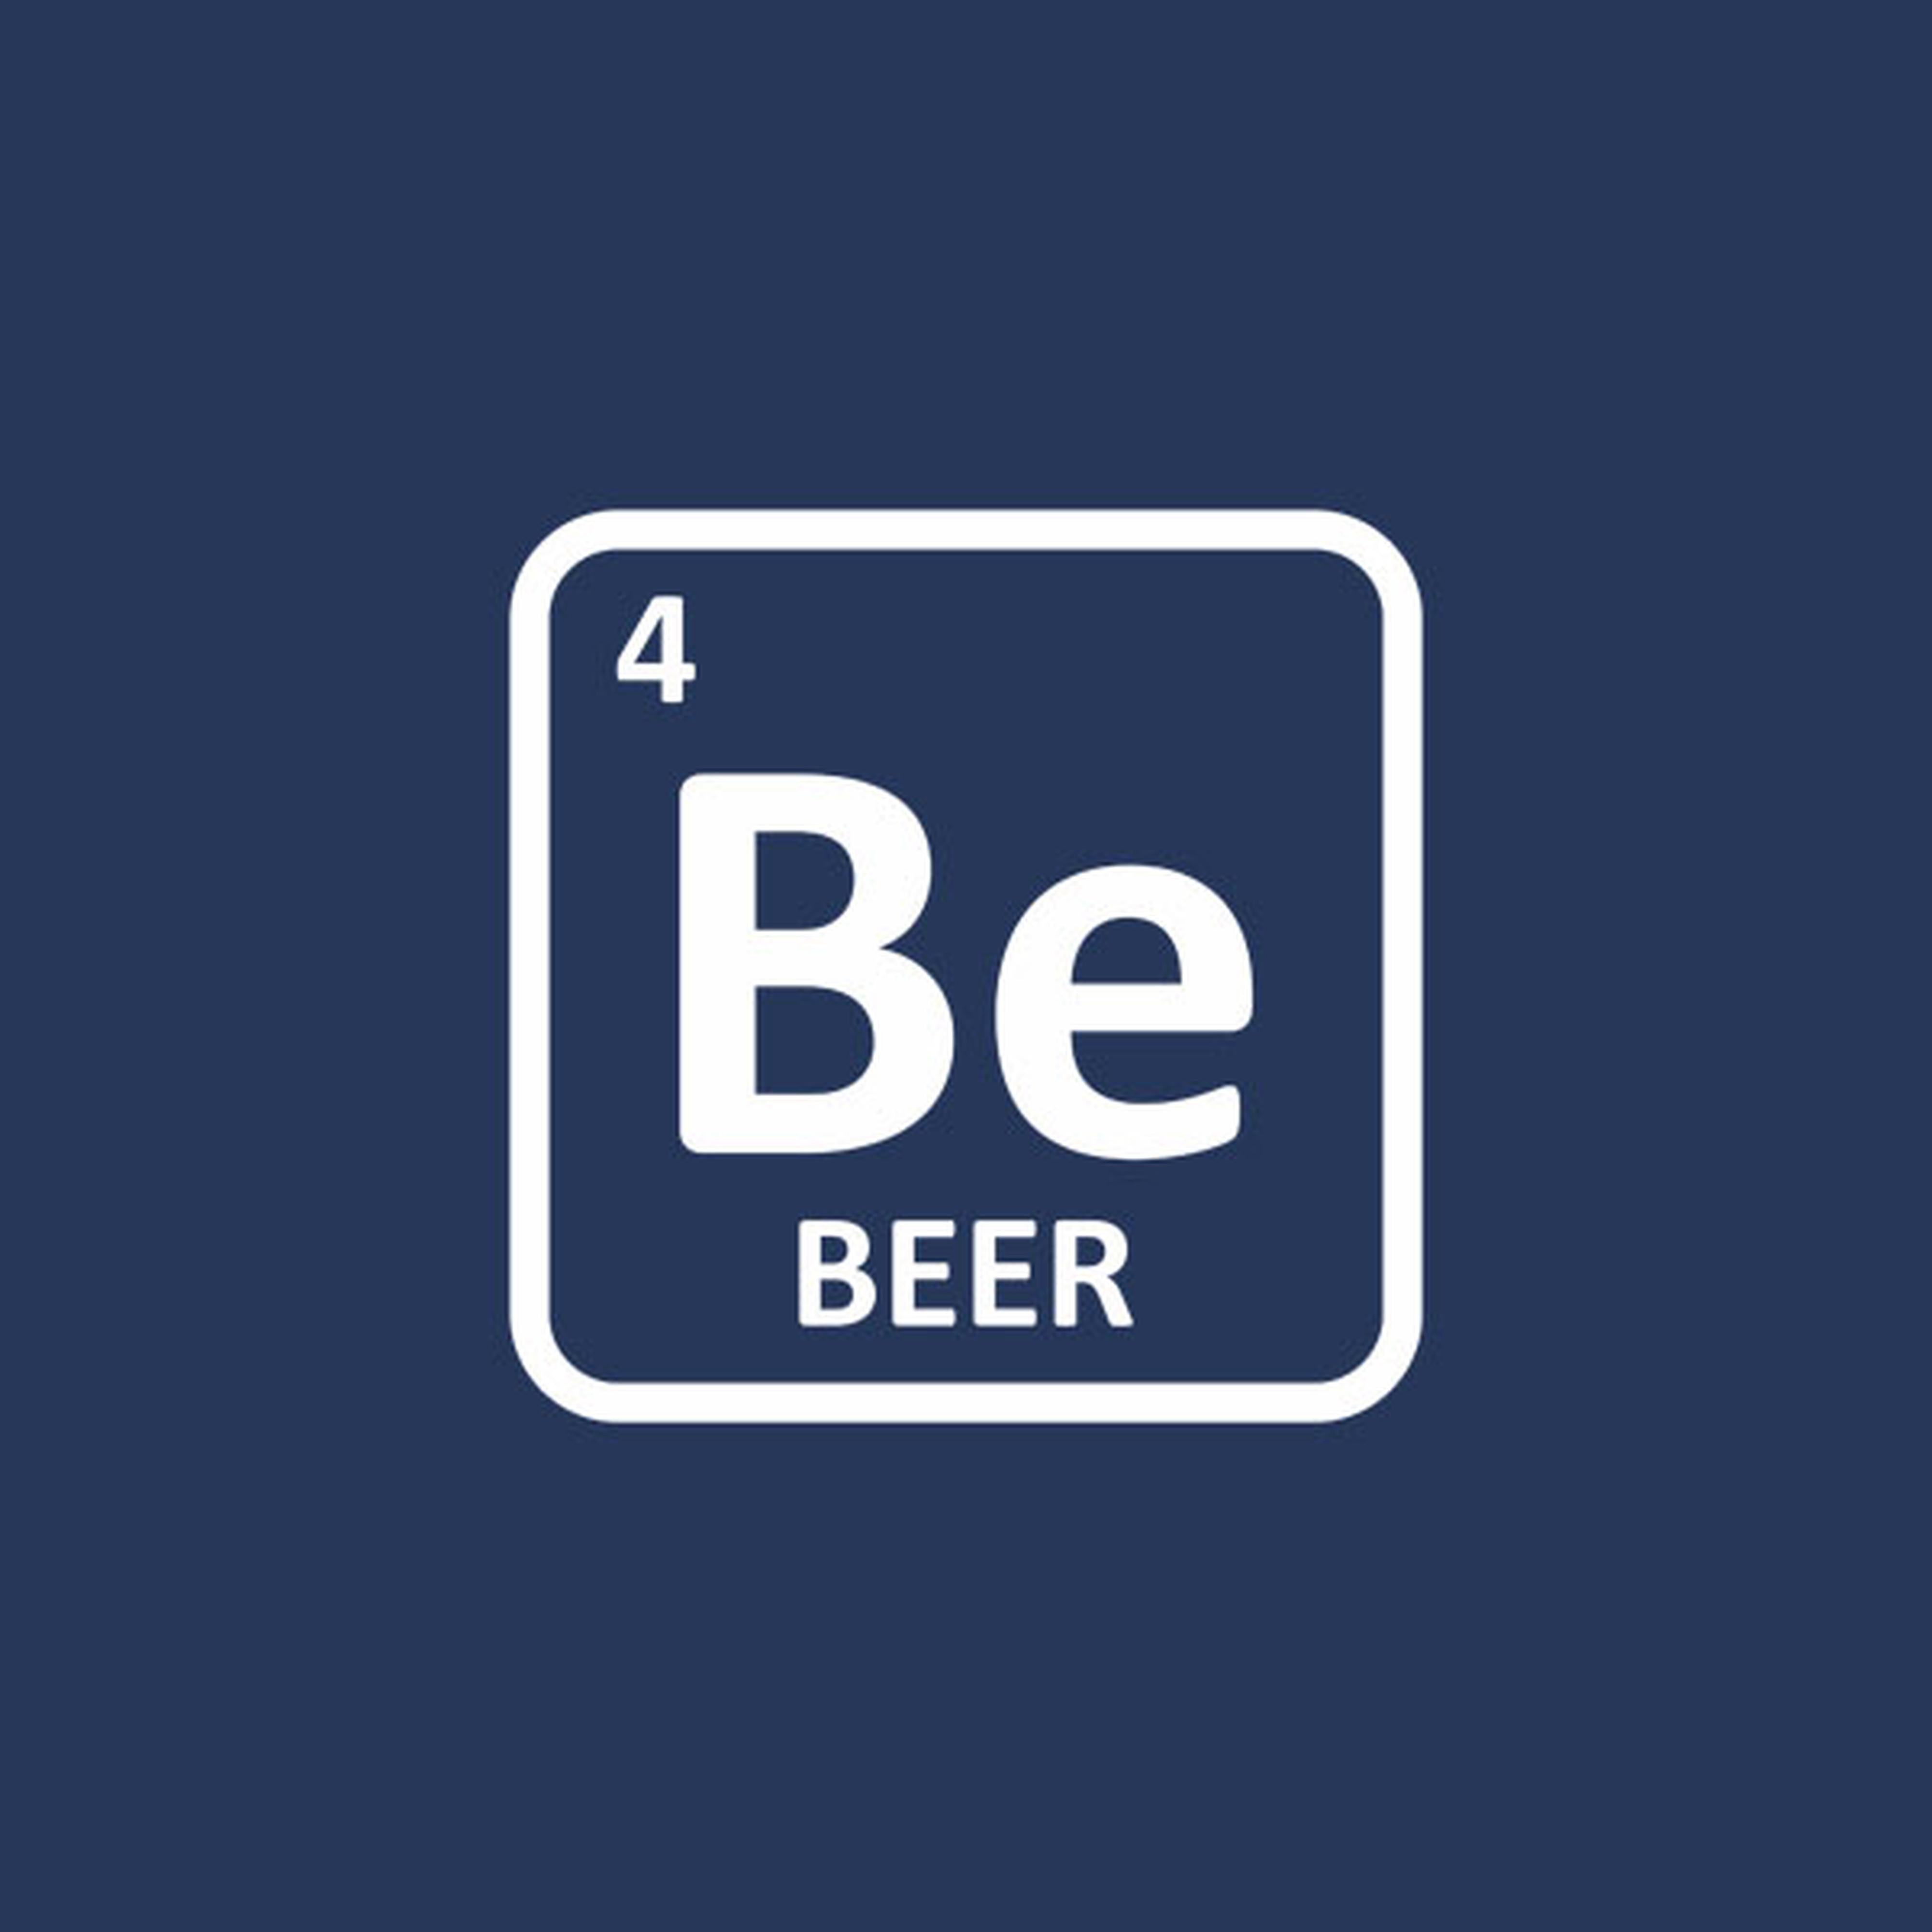 The element of Beer - T-shirt